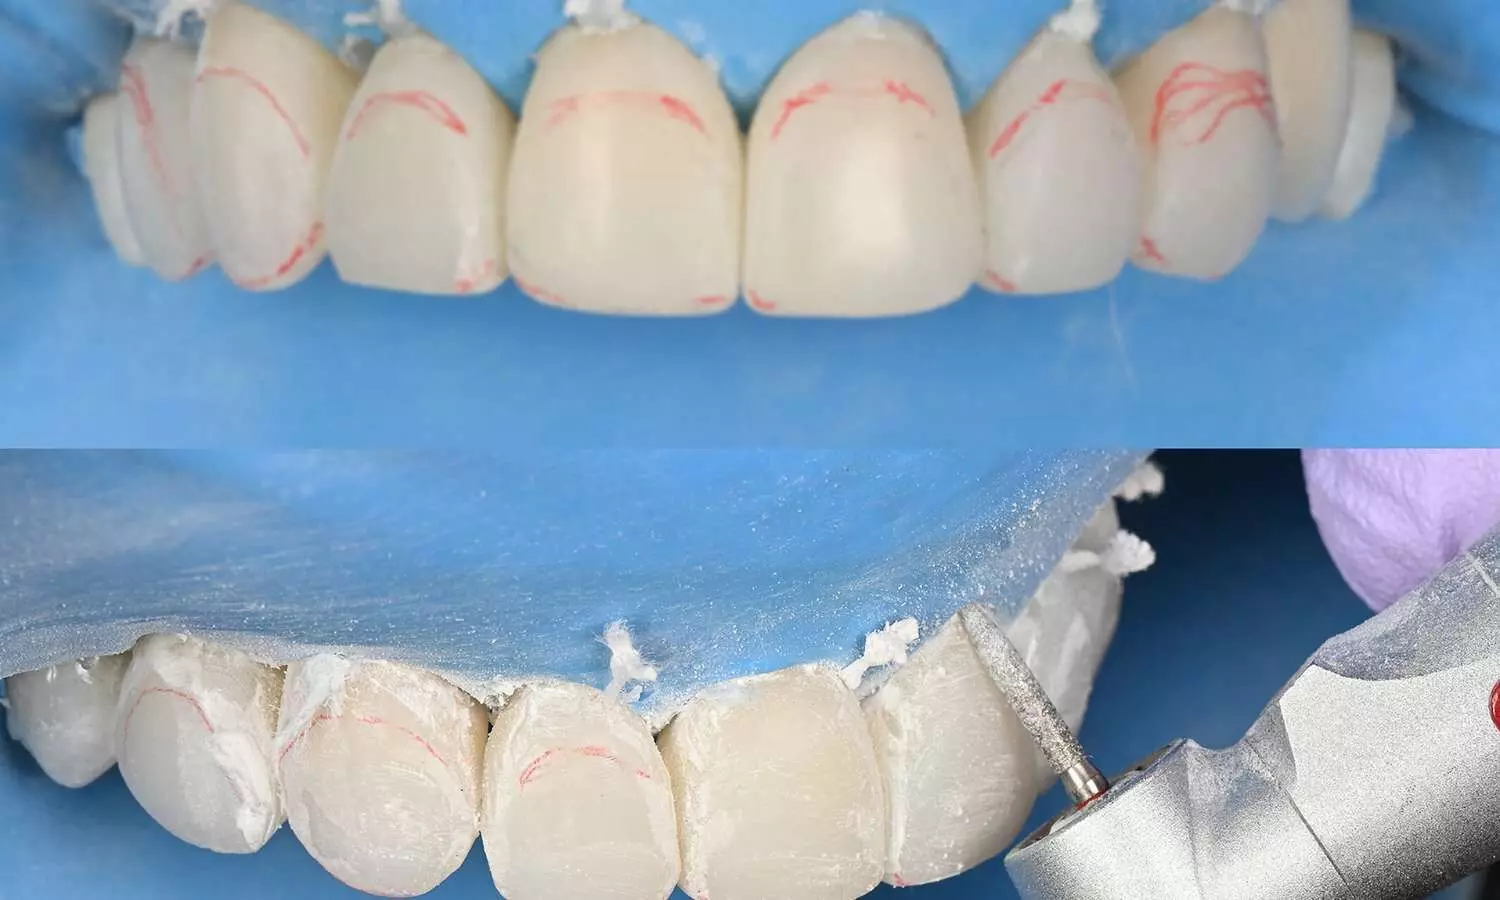 Composite resin teeth have a greater wear resistance than acrylic and 3D-printed resin teeth